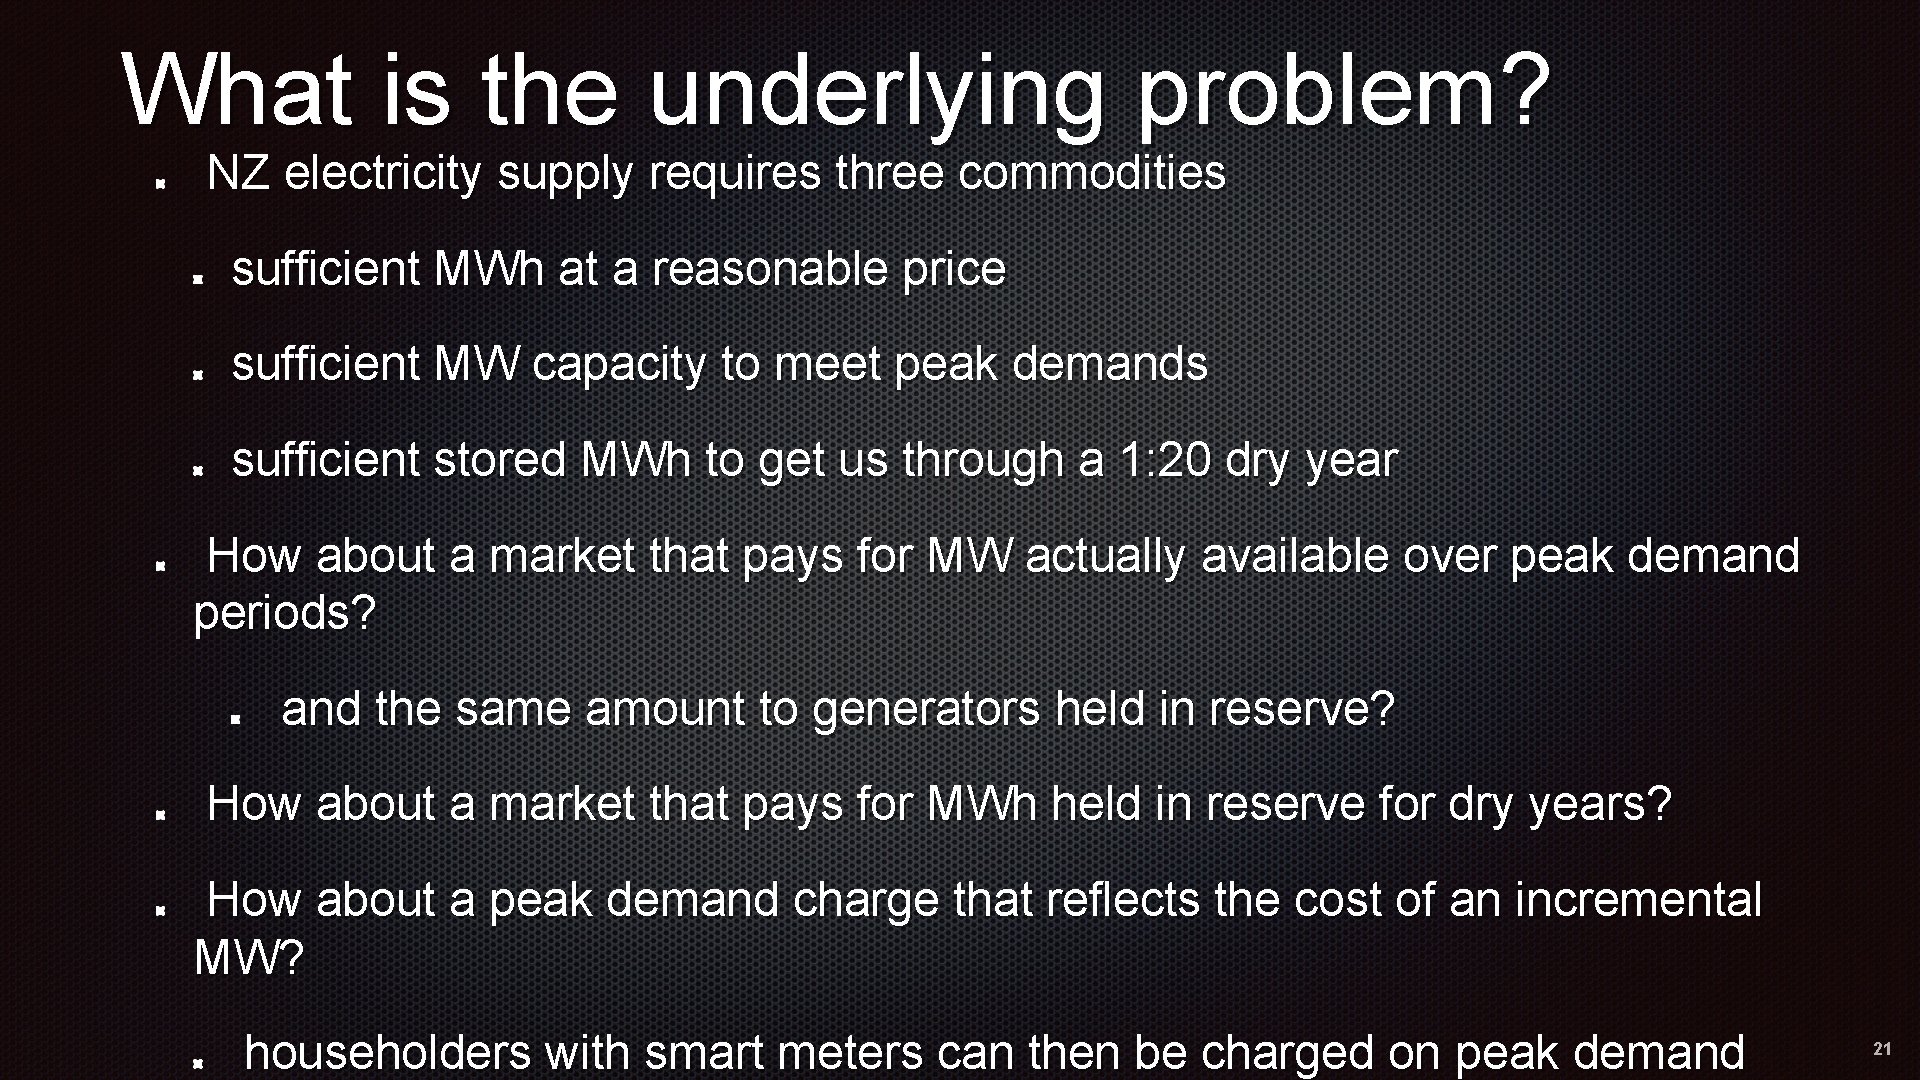 What is the underlying problem? NZ electricity supply requires three commodities sufficient MWh at